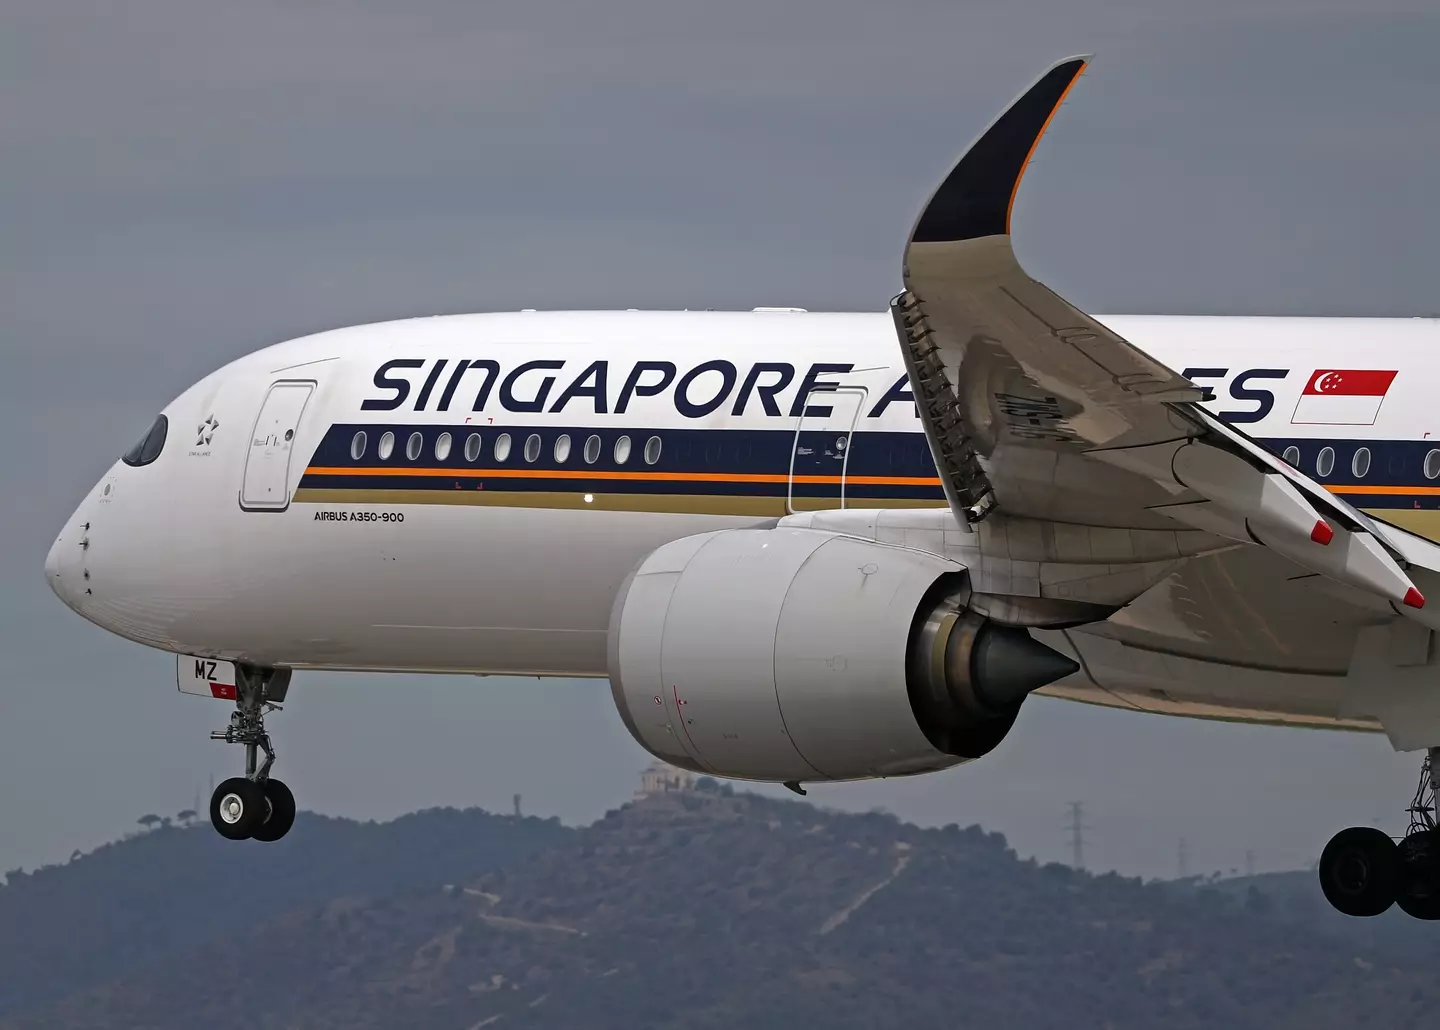 The Singapore Airlines attendant was praised for her kind gesture.